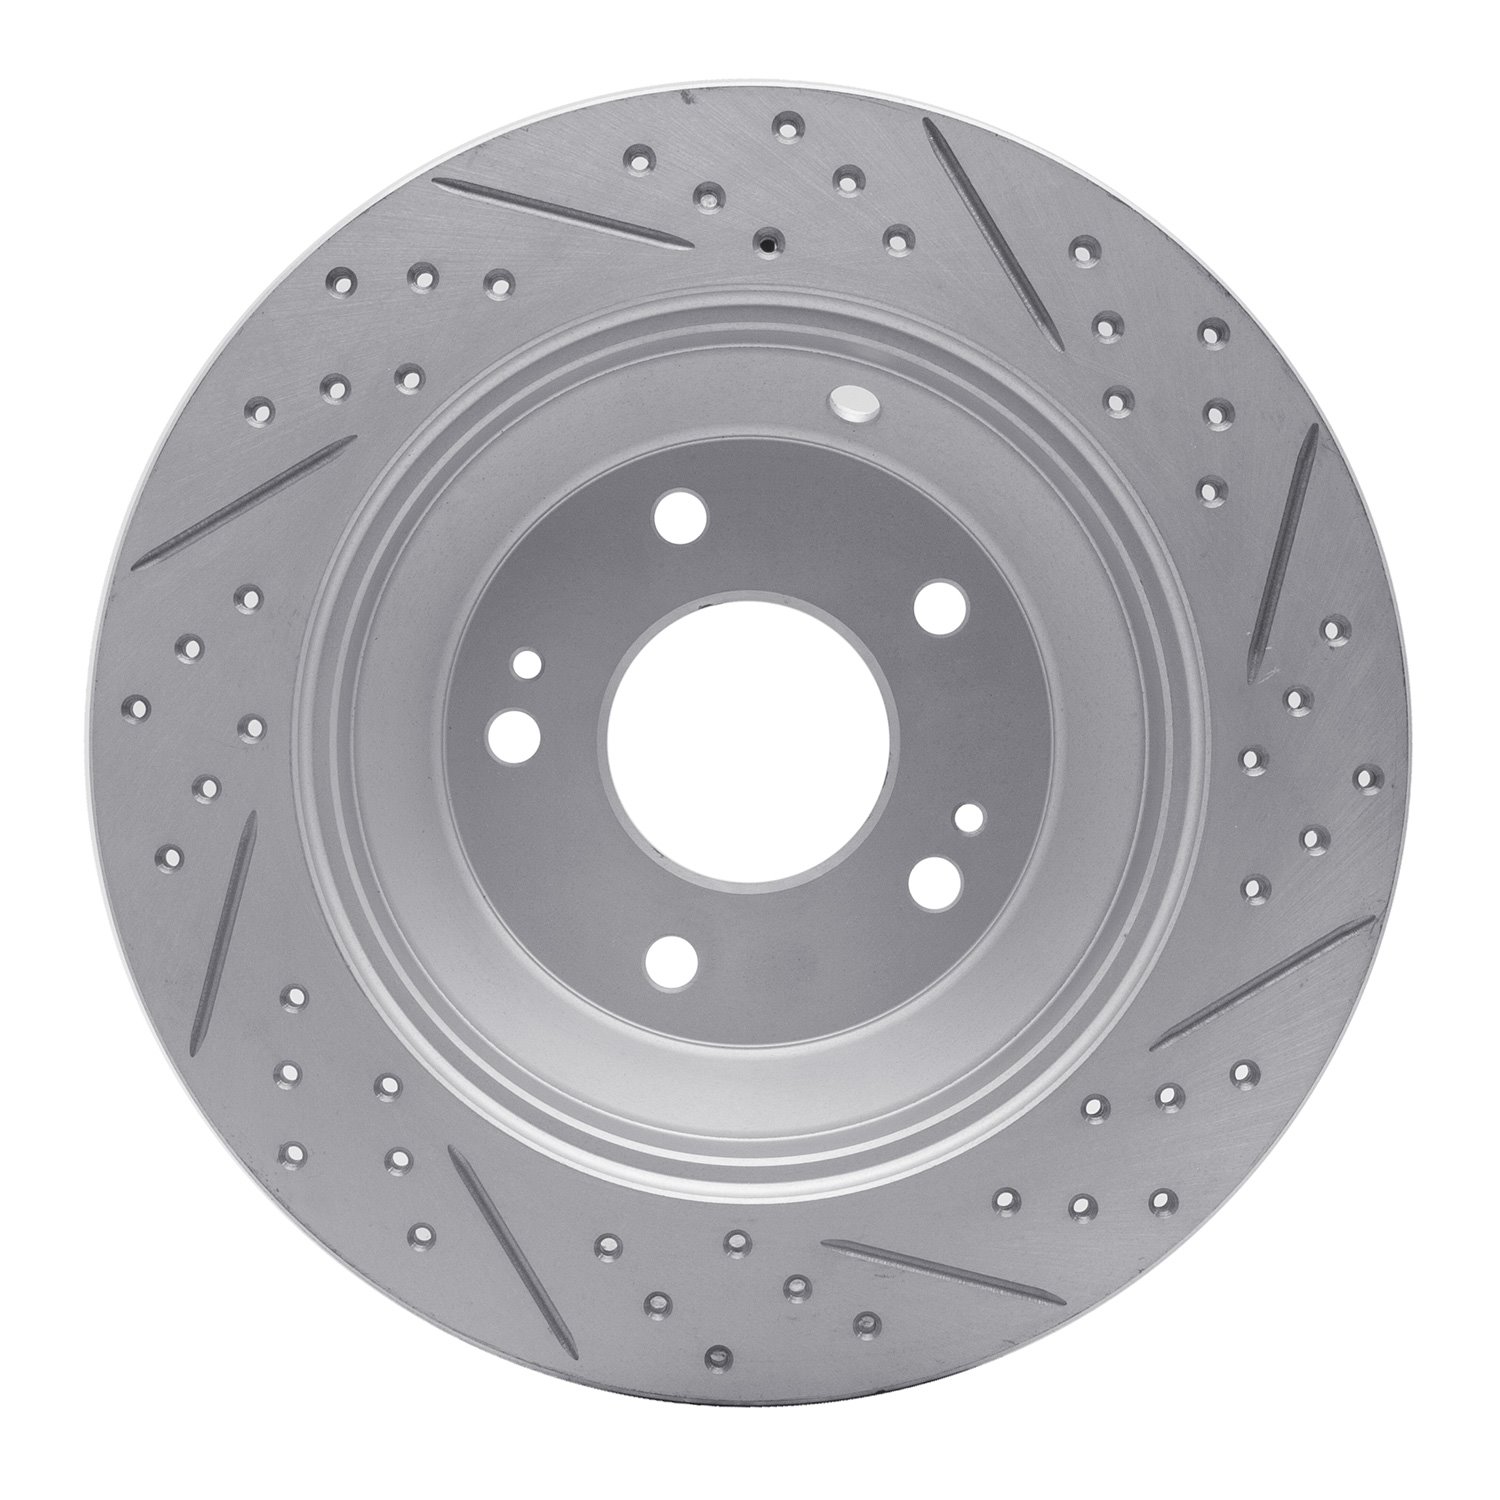 830-03059R Geoperformance Drilled/Slotted Brake Rotor, Fits Select Kia/Hyundai/Genesis, Position: Rear Right